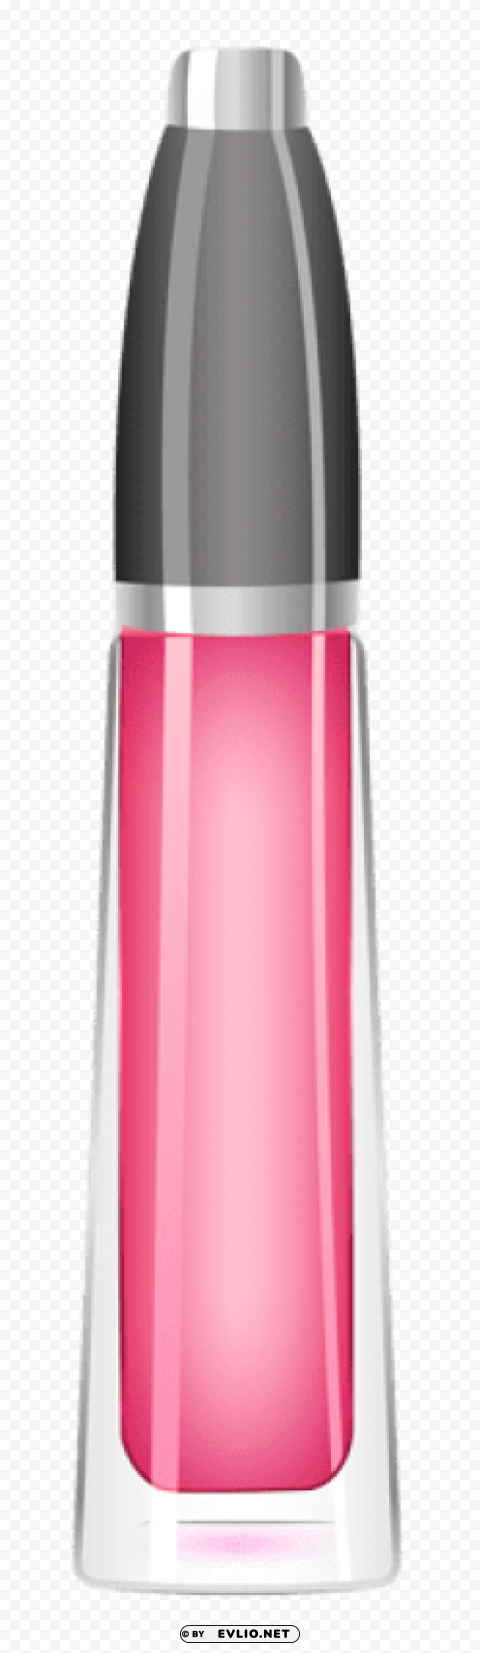 lipstick pink Isolated Character on Transparent PNG